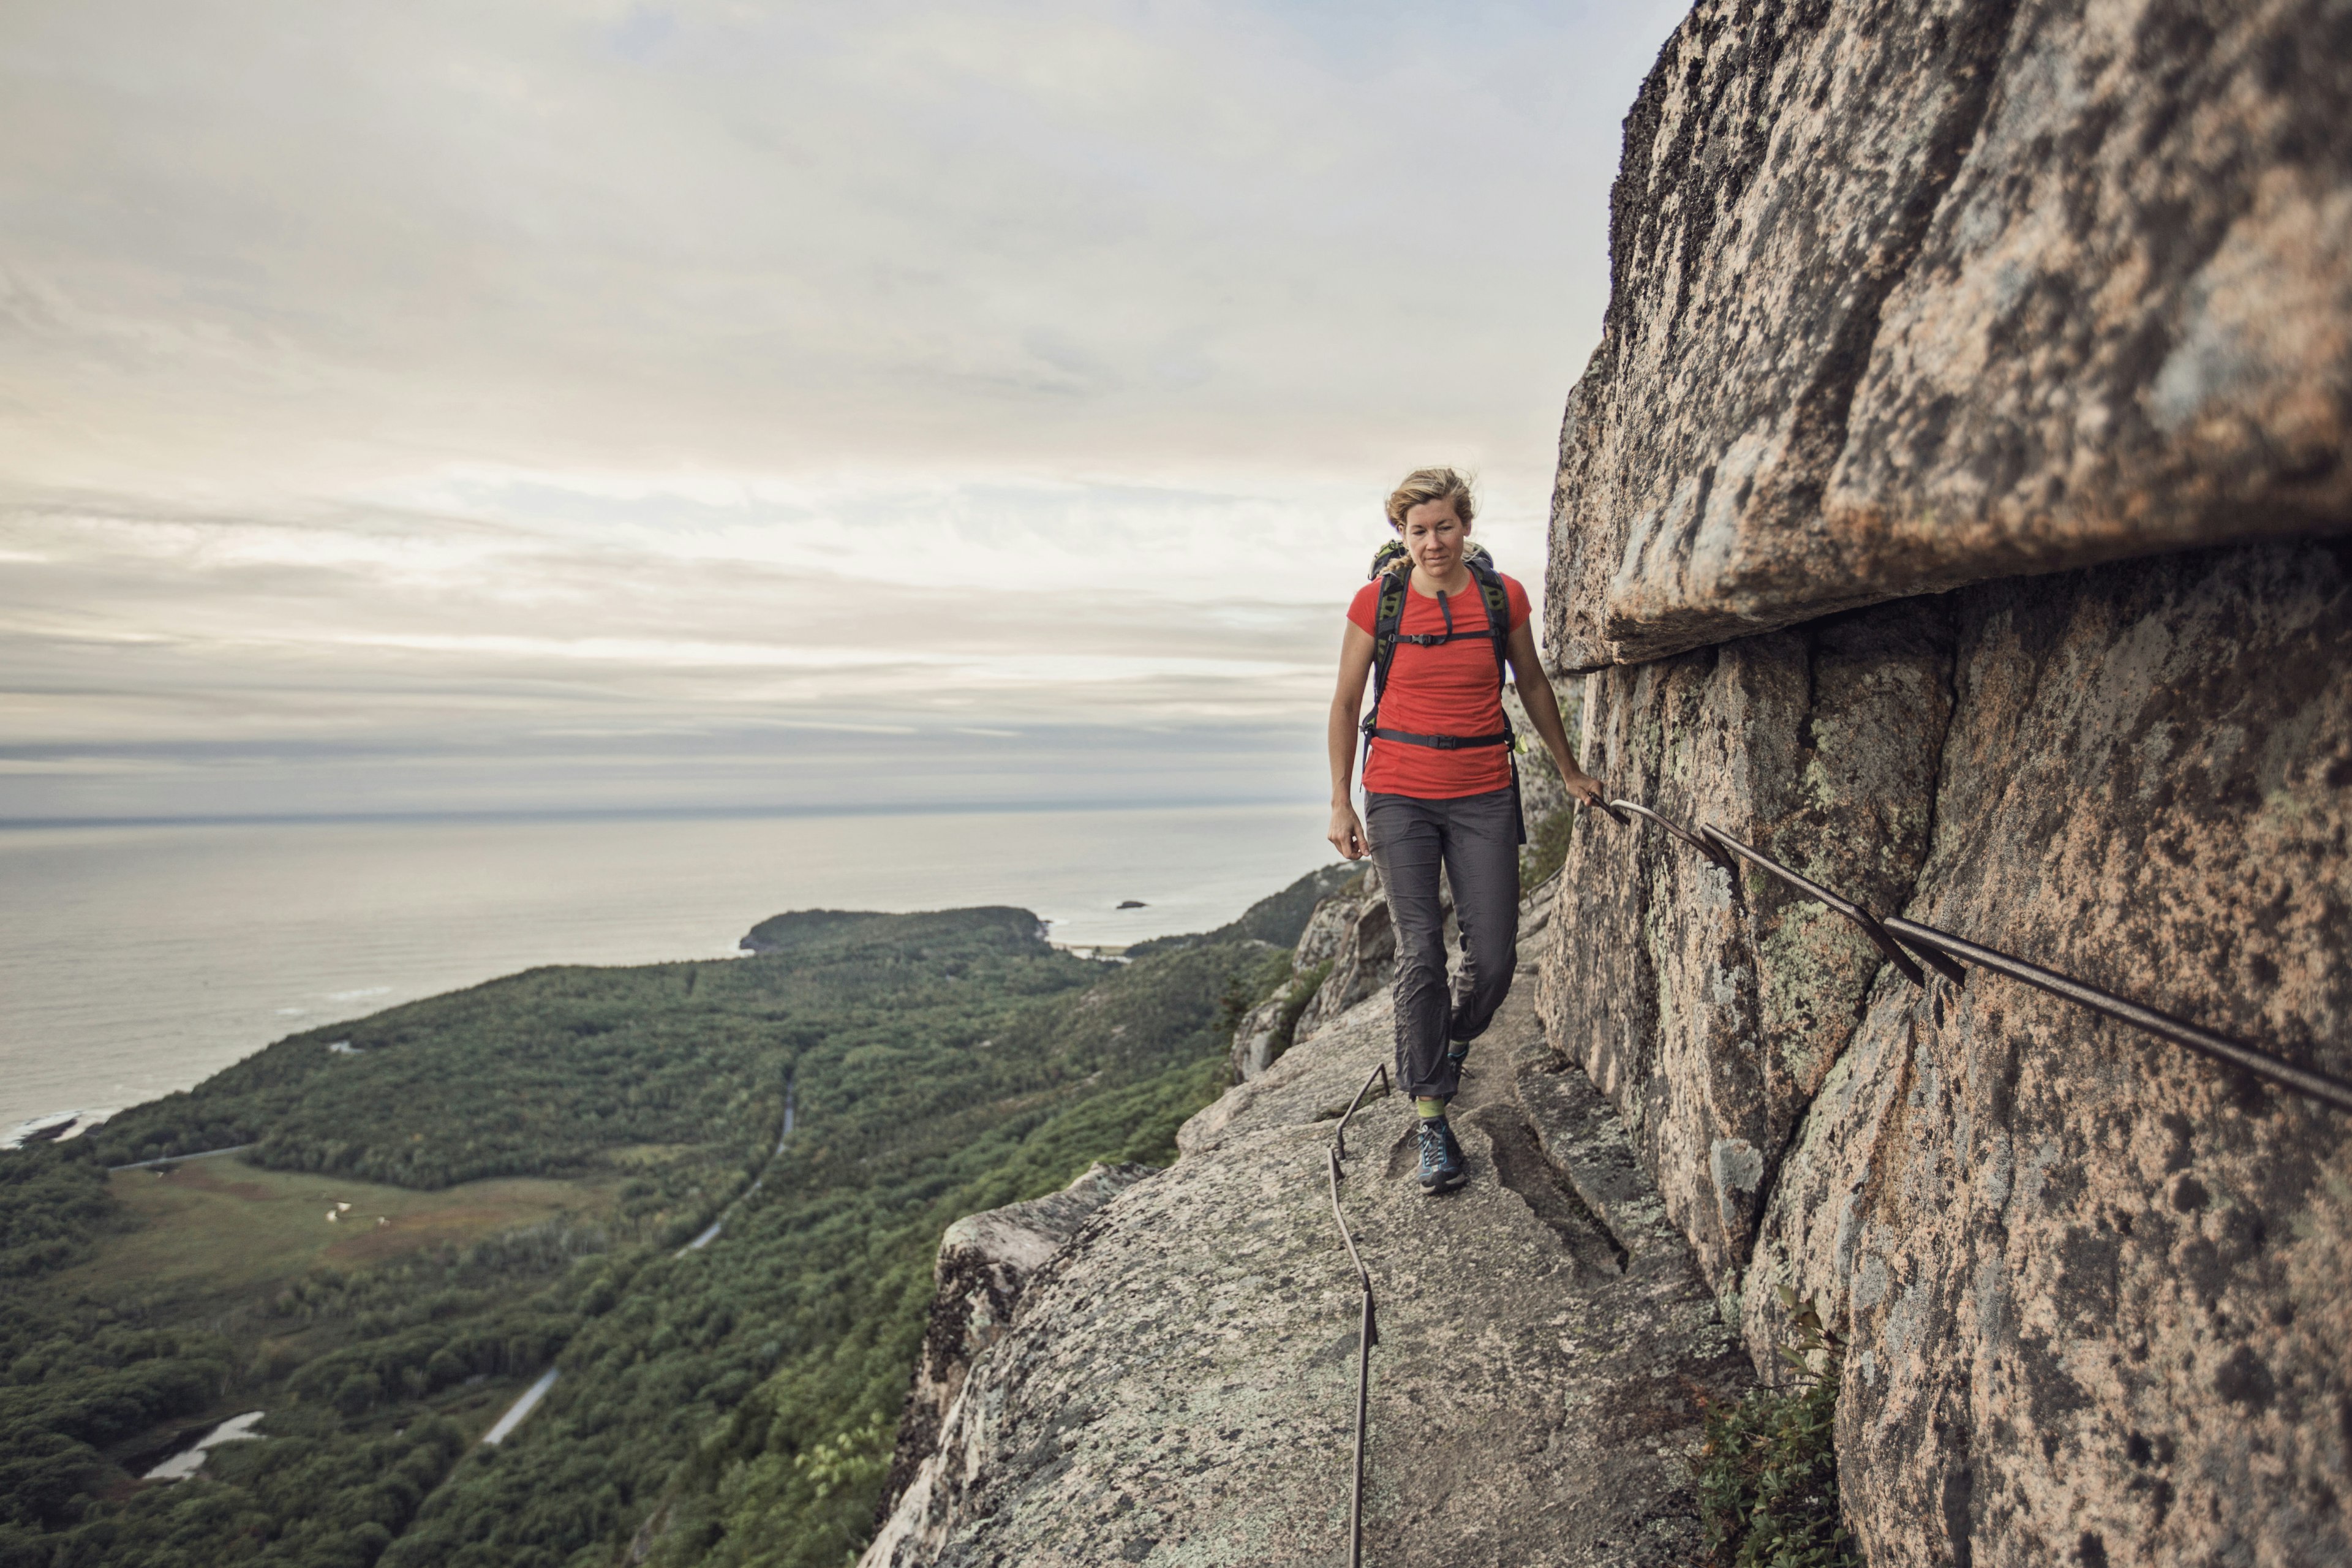 A woman hikes along the cliff edge in Maines Acadia National Park, Maine